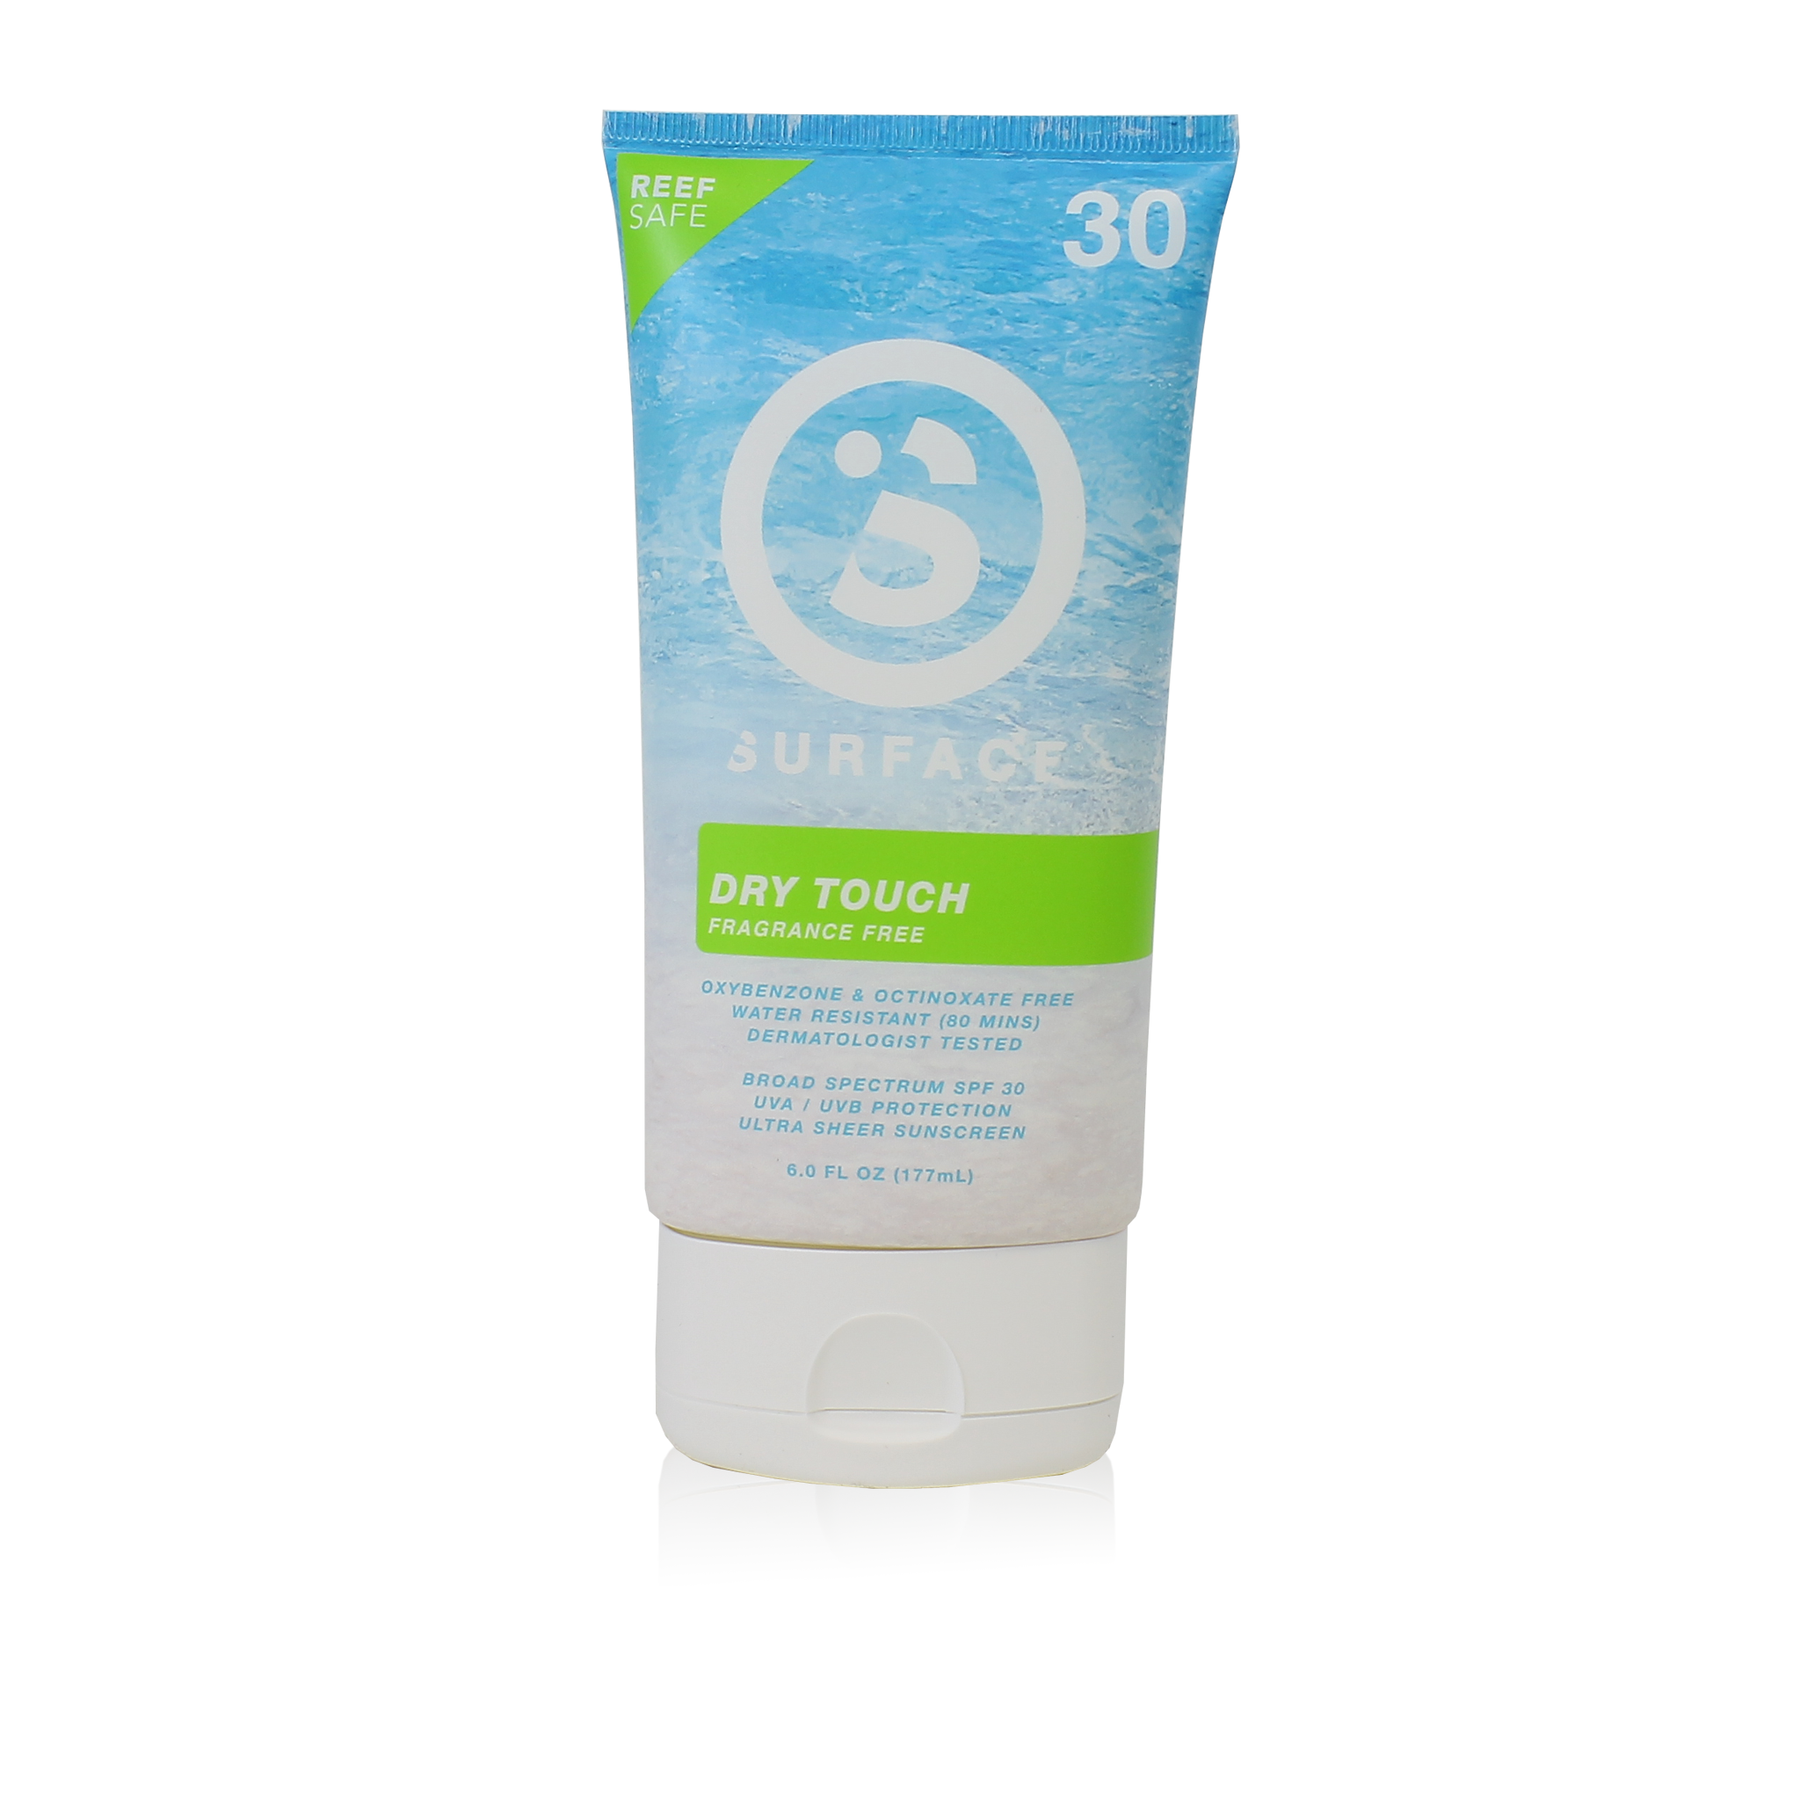 Surface Dry Touch Lotion - Spf30 - 6Oz